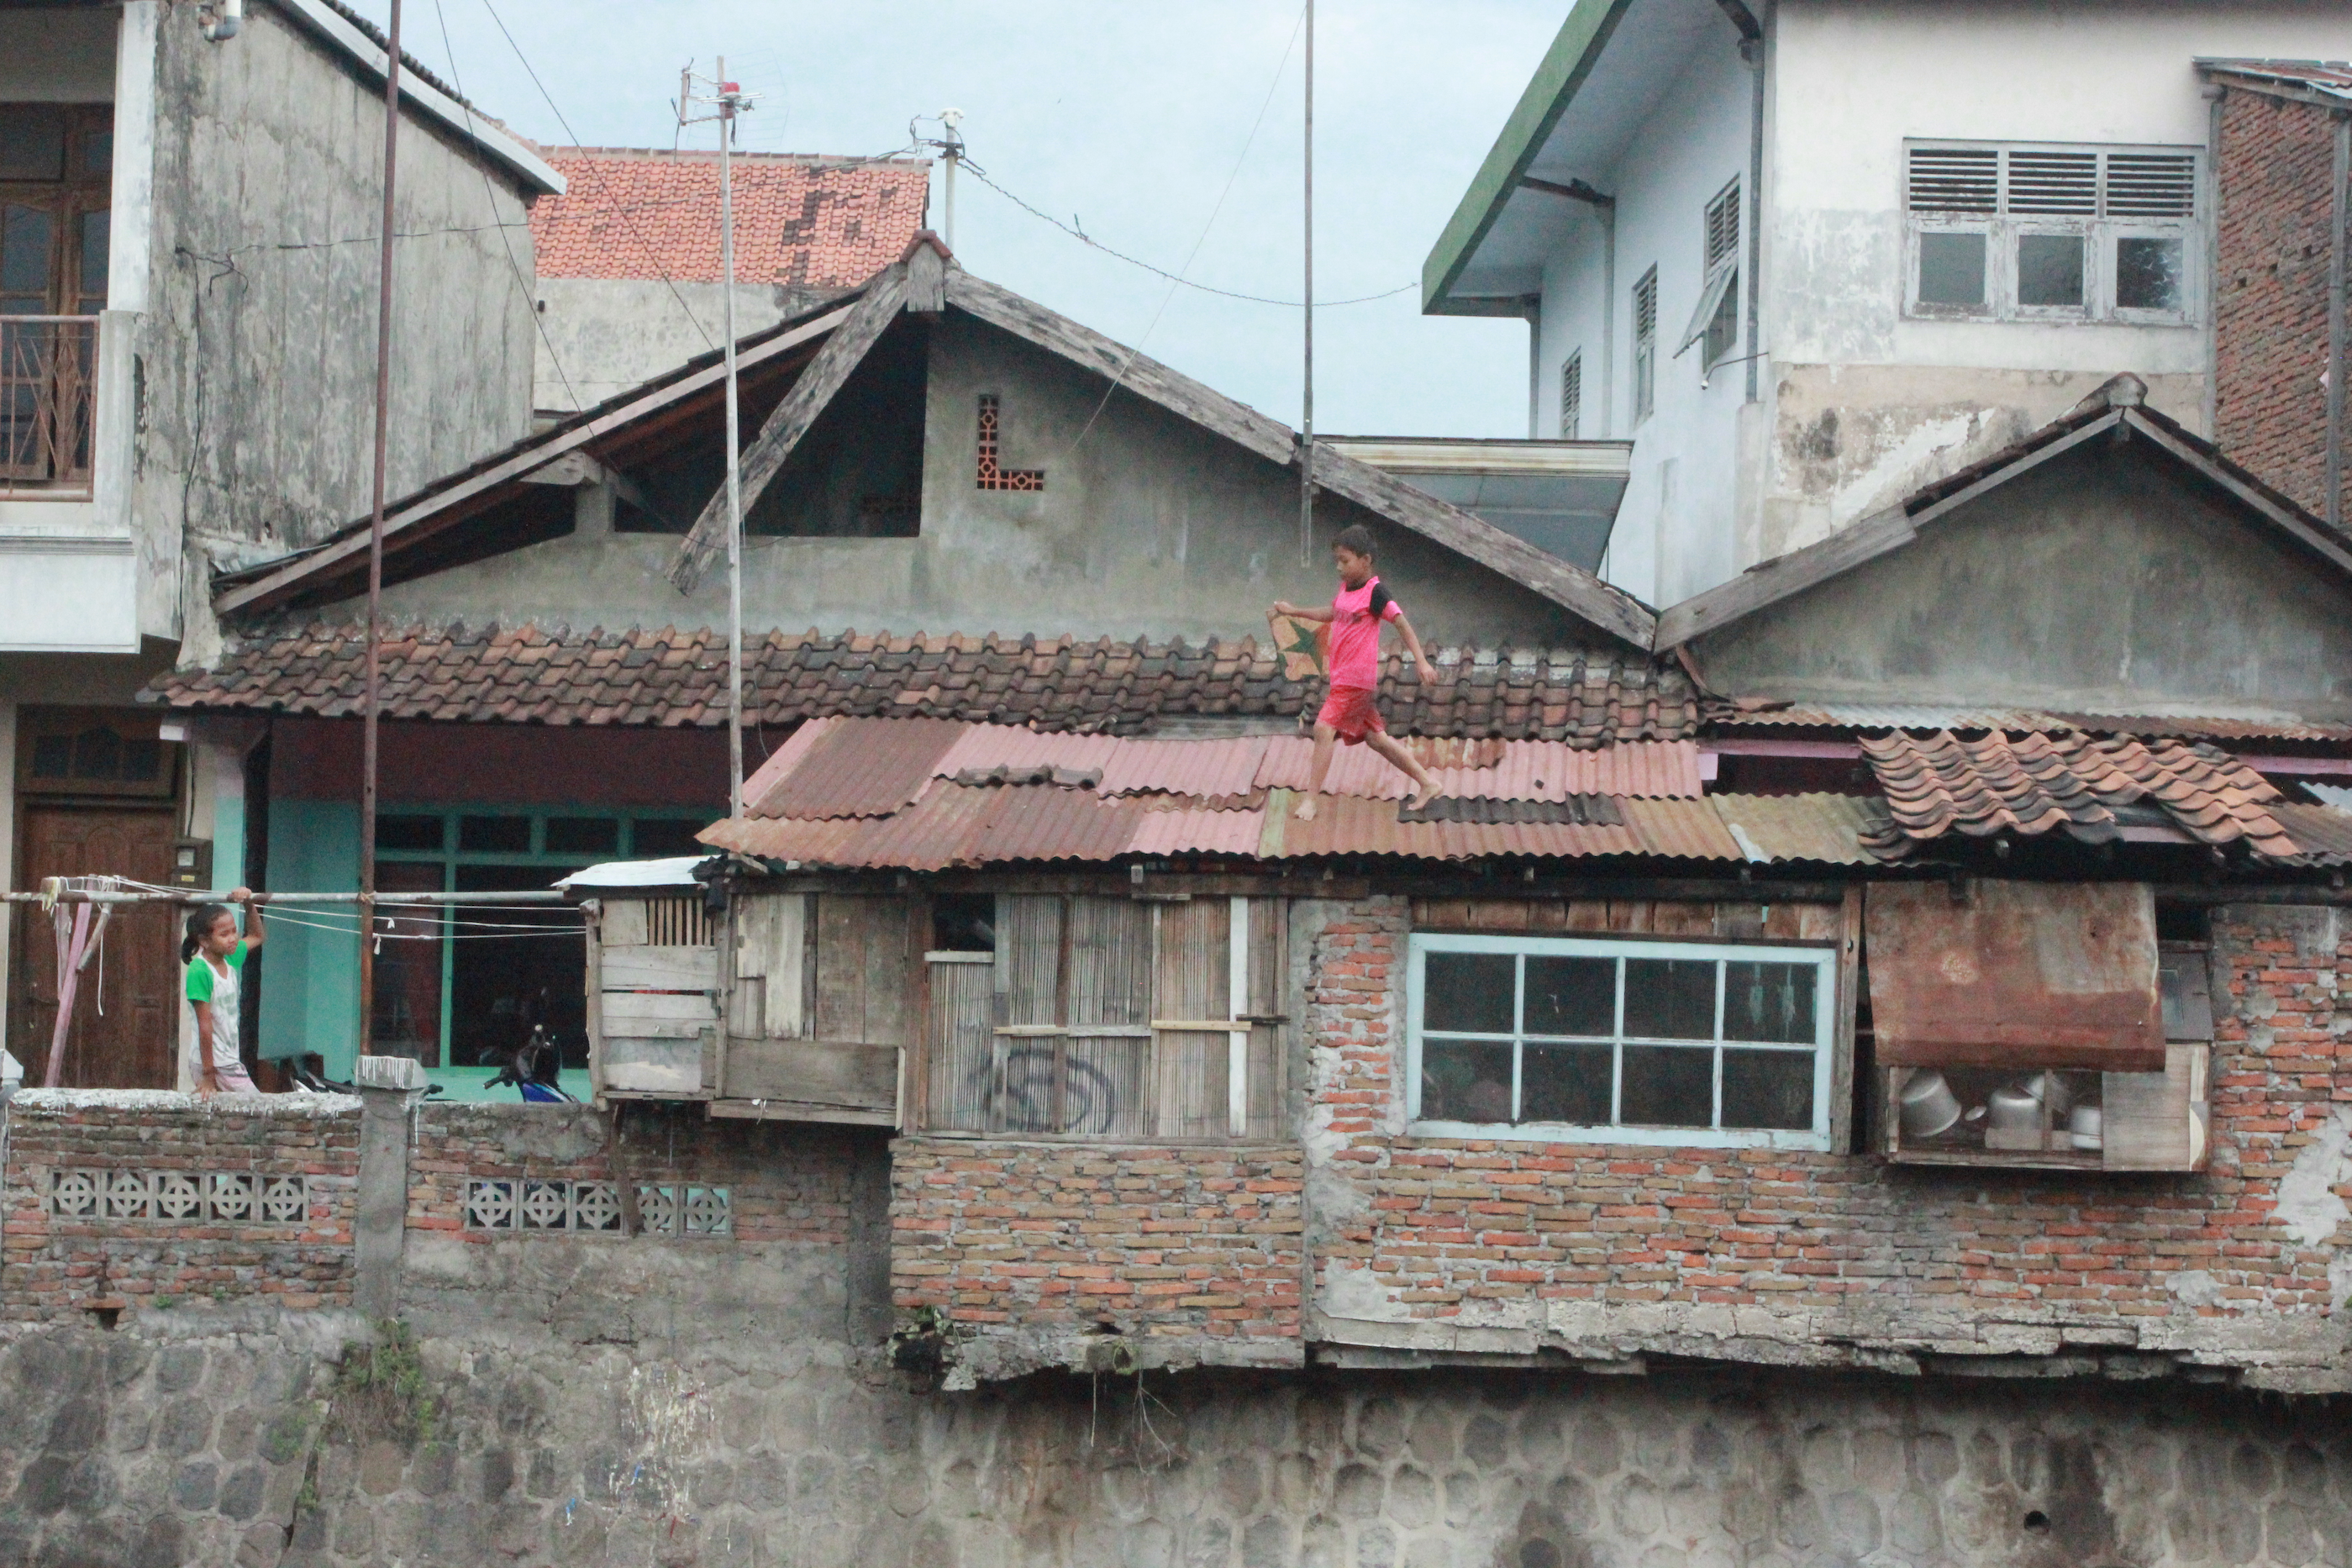 Boy walking on the roof 